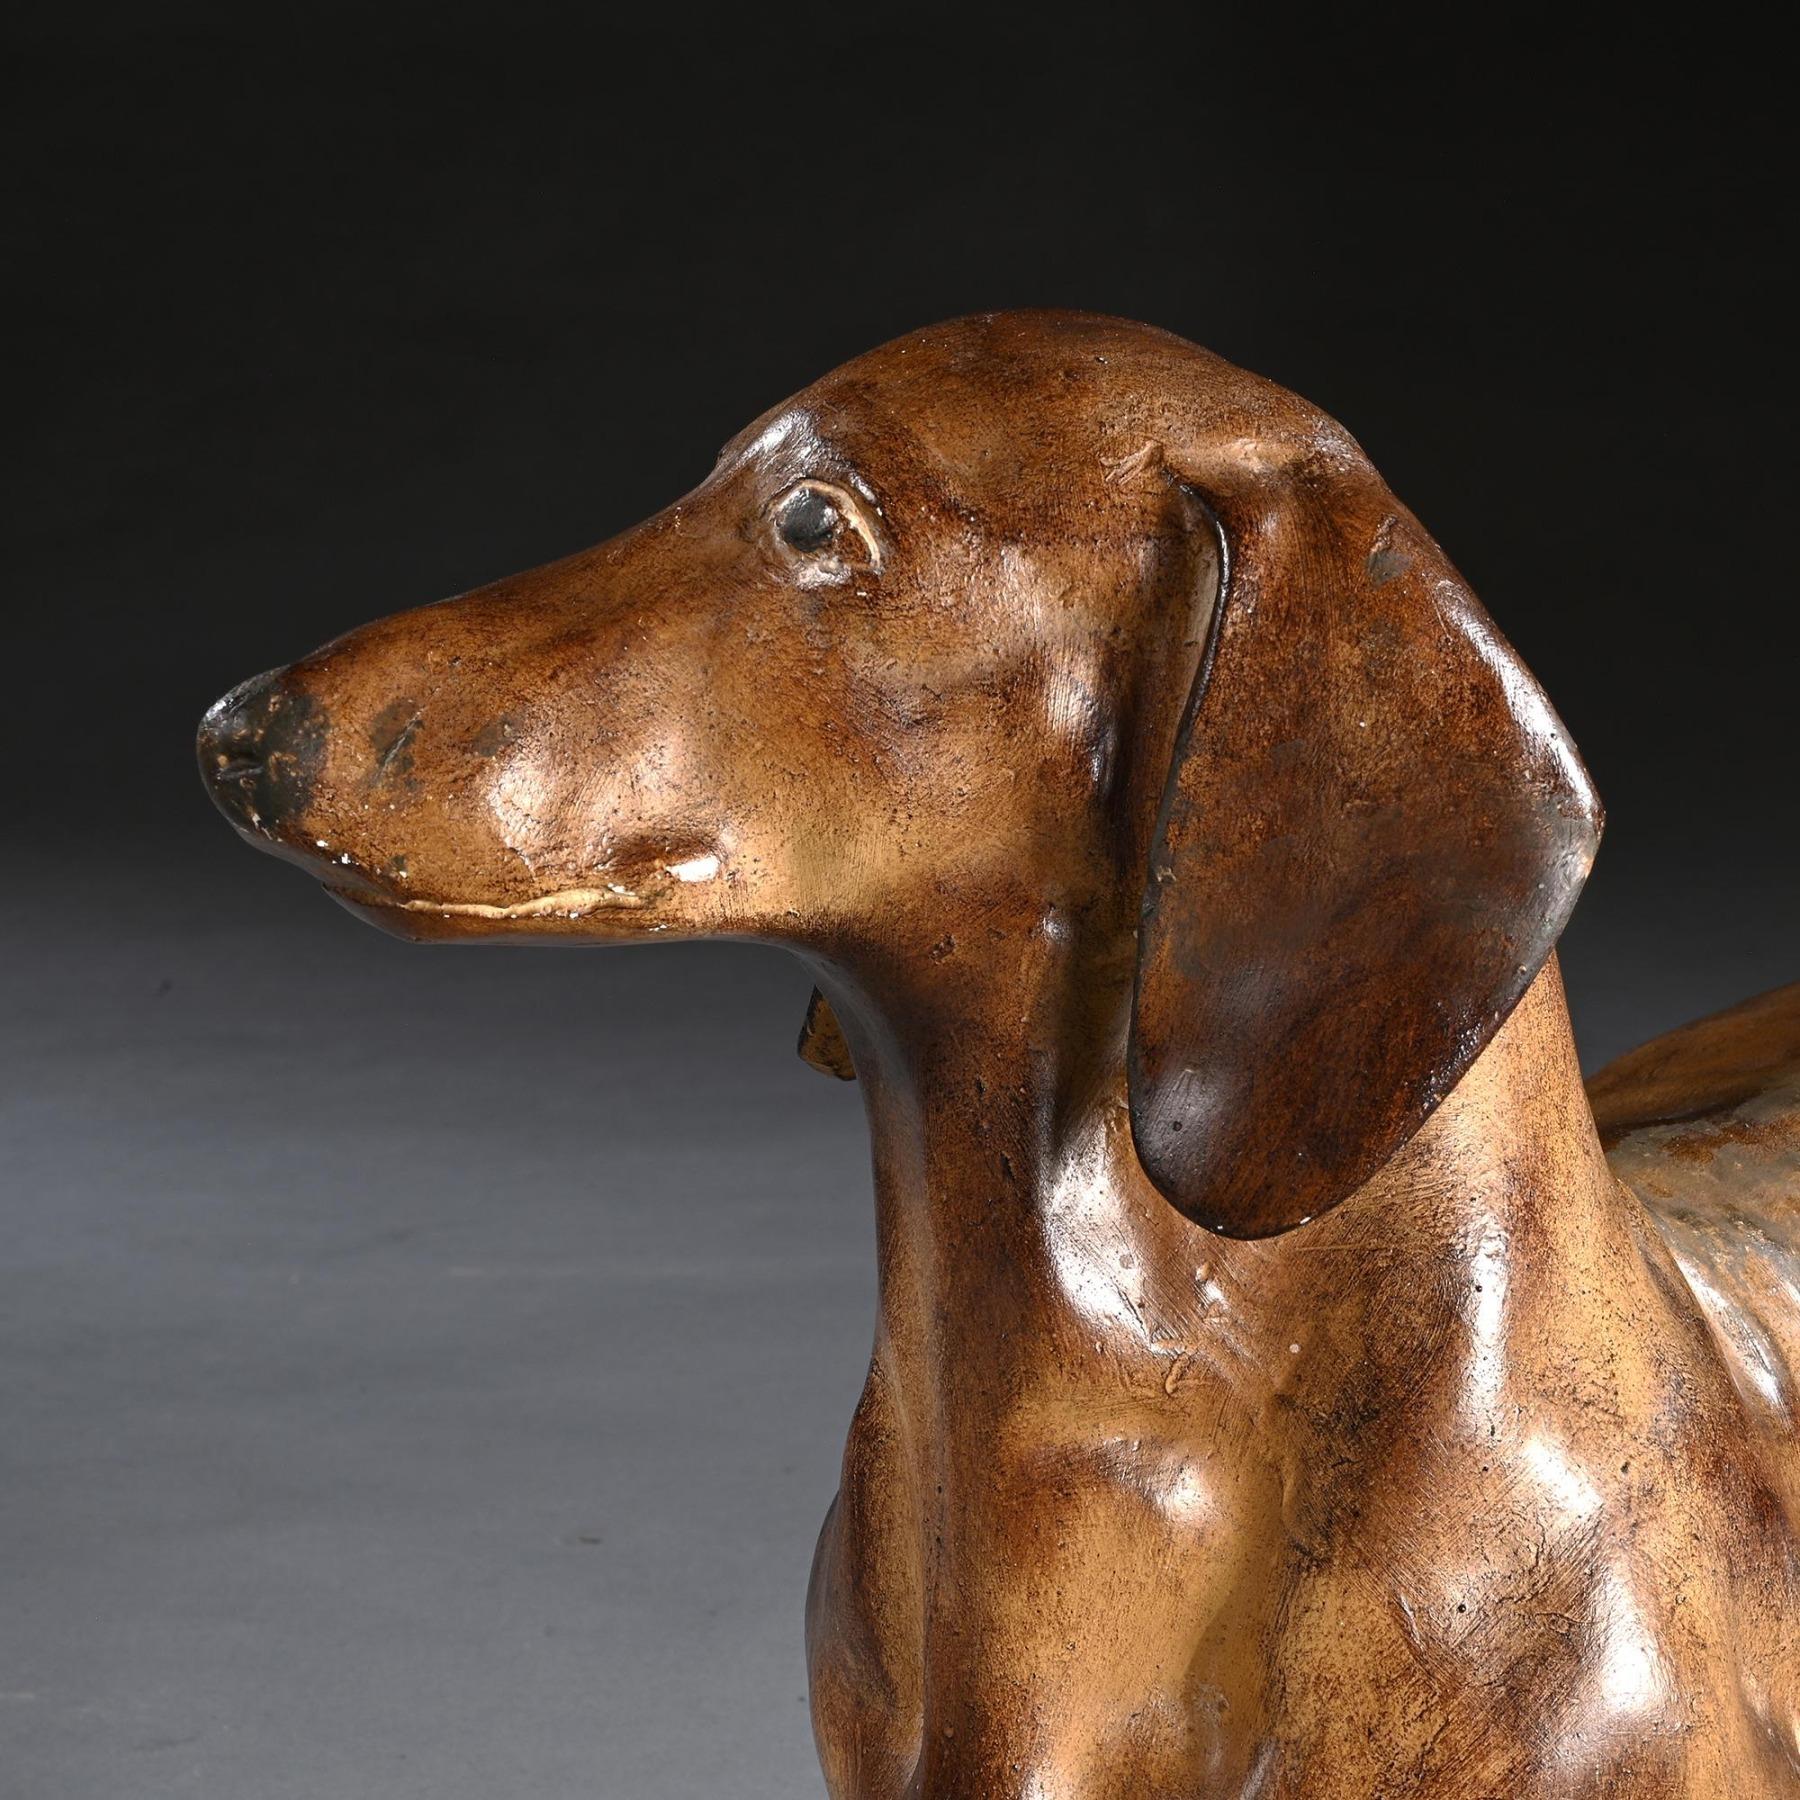 Rare French Life-like Glazed Terracotta Sculpture of a Dachshund Dog For Sale 1